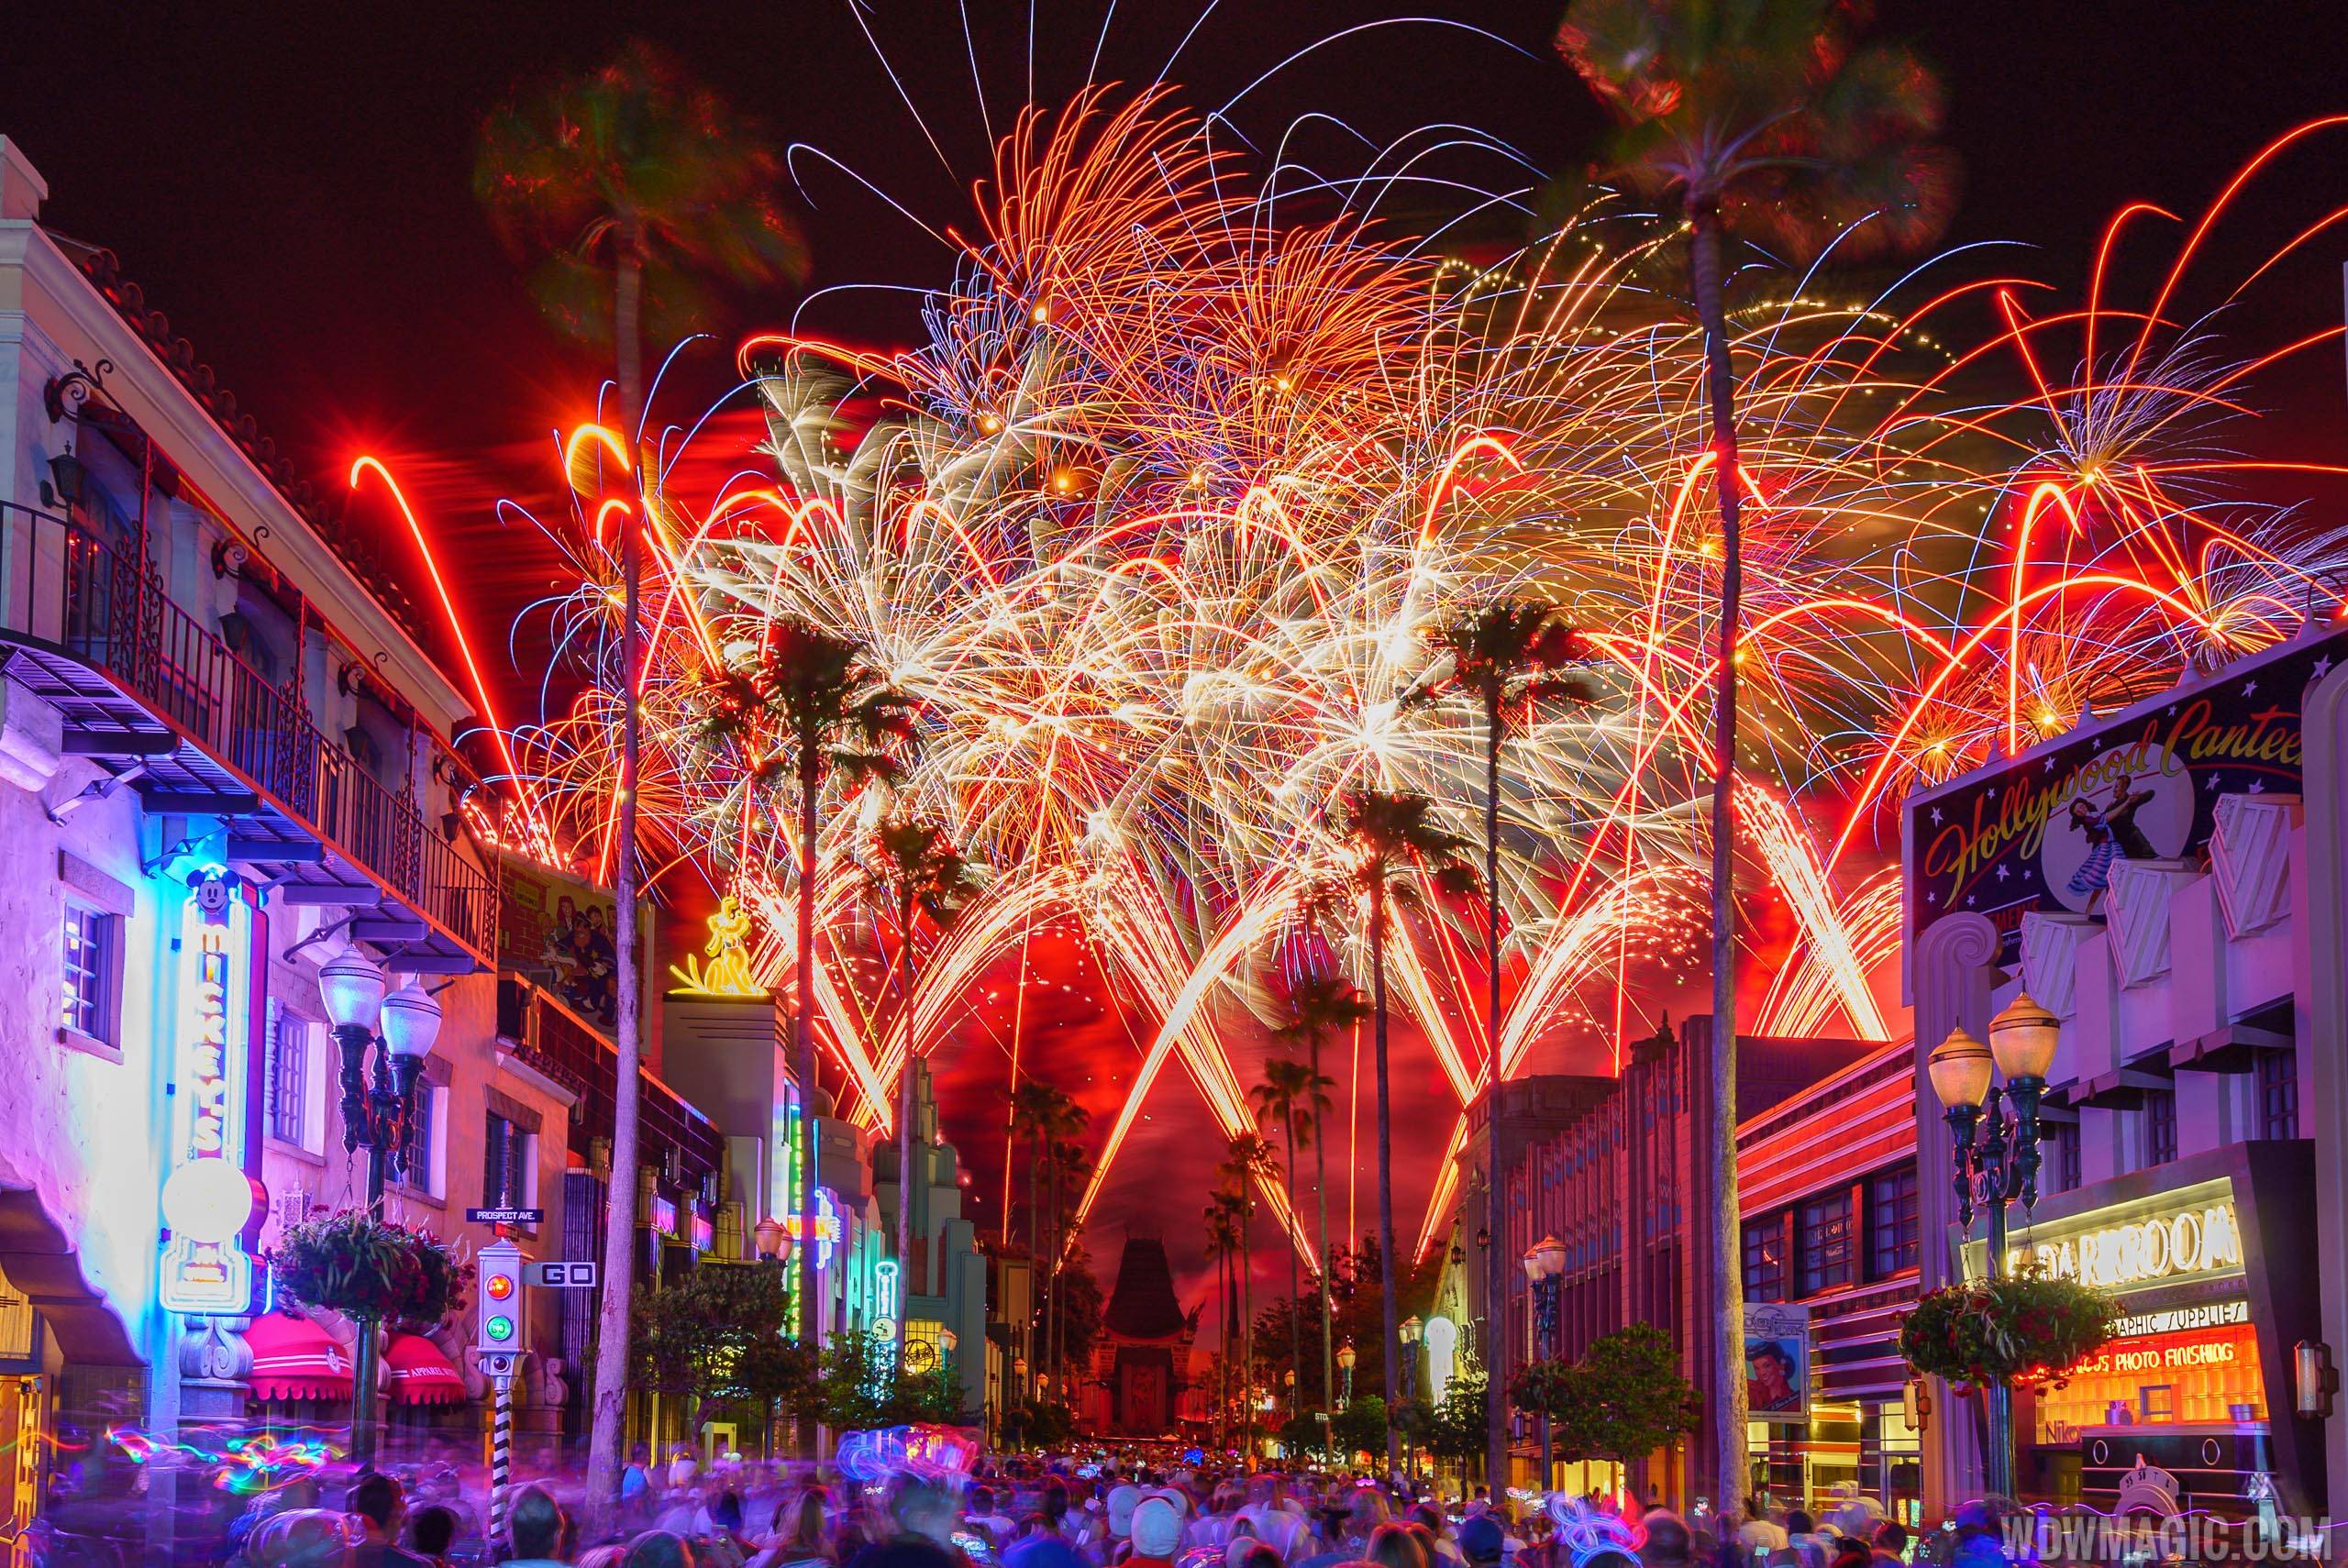 Symphony in the Stars fireworks dates available for May